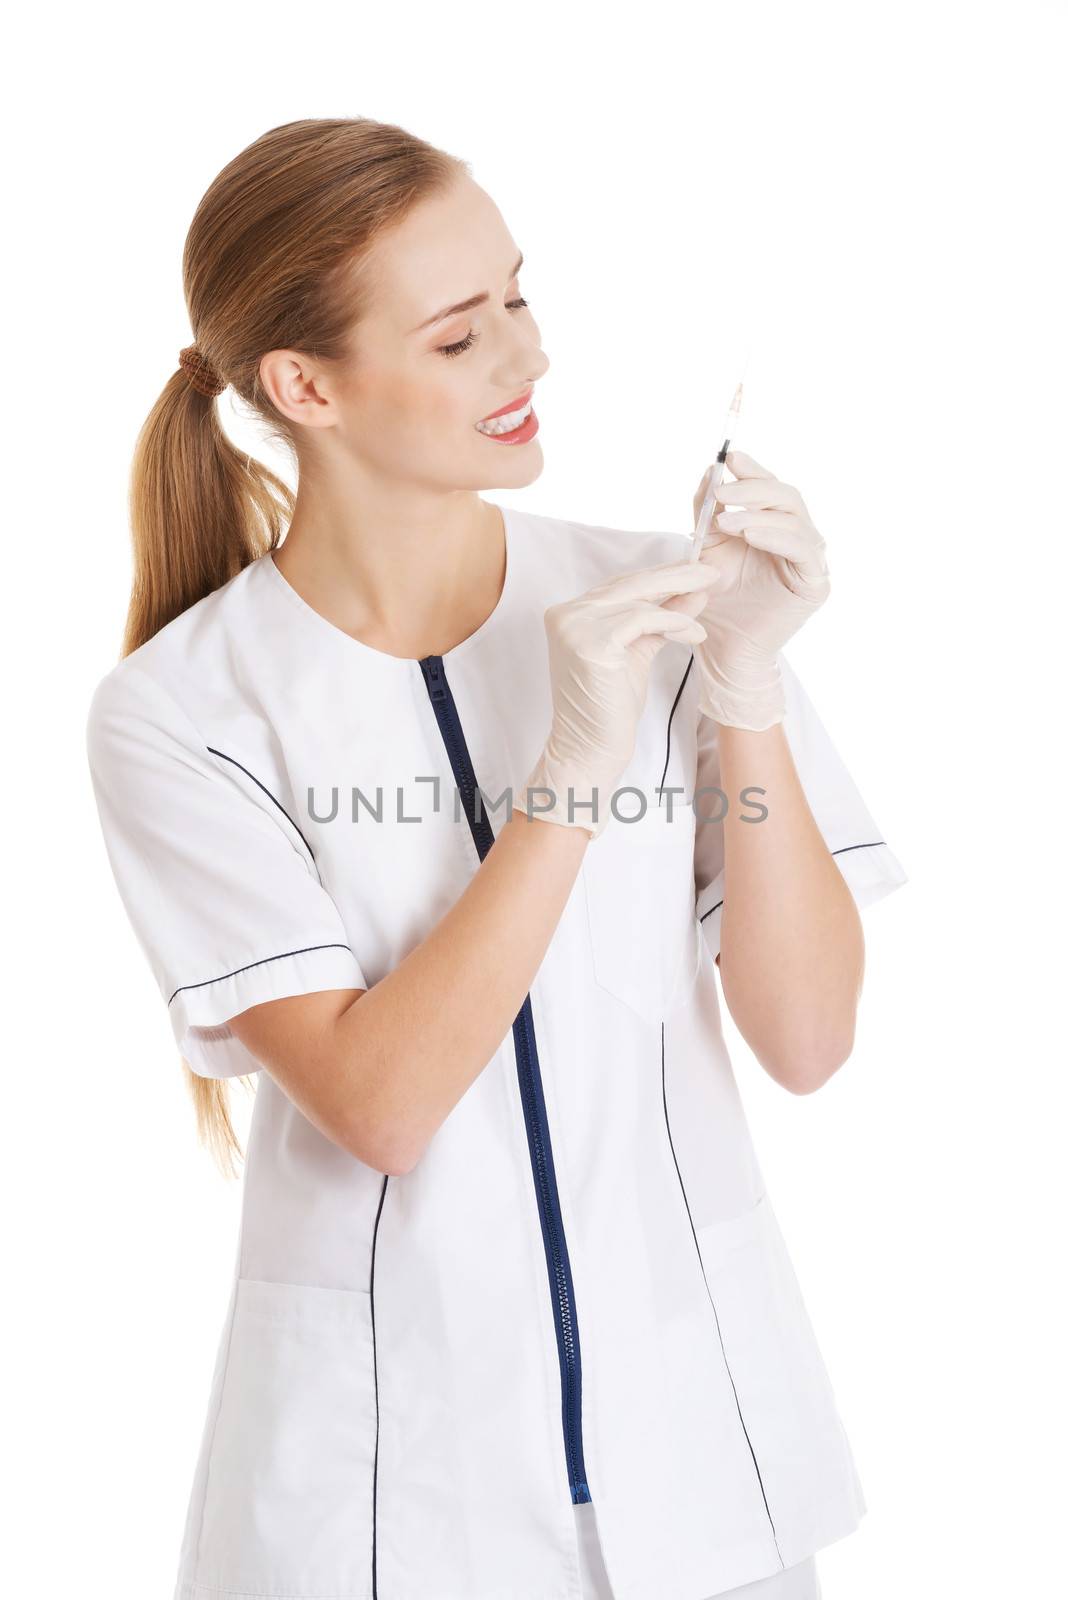 Beautiful young nurse or doctor with needle, shot ready to apply. Isolated on white.